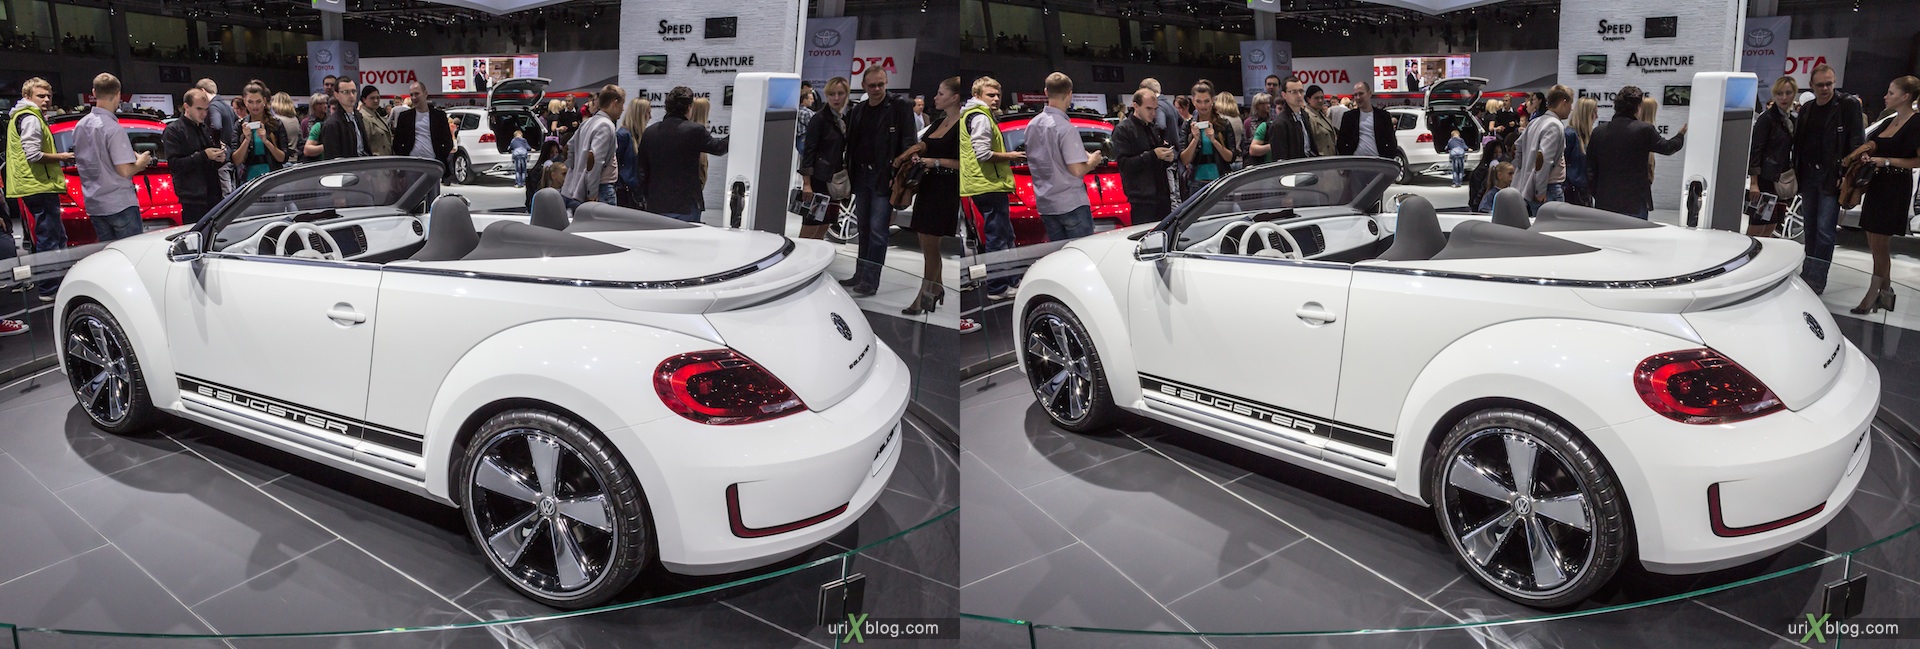 2012, Volkswagen e-bugster, Moscow International Automobile Salon, auto show, 3D, stereo pair, cross-eyed, crossview